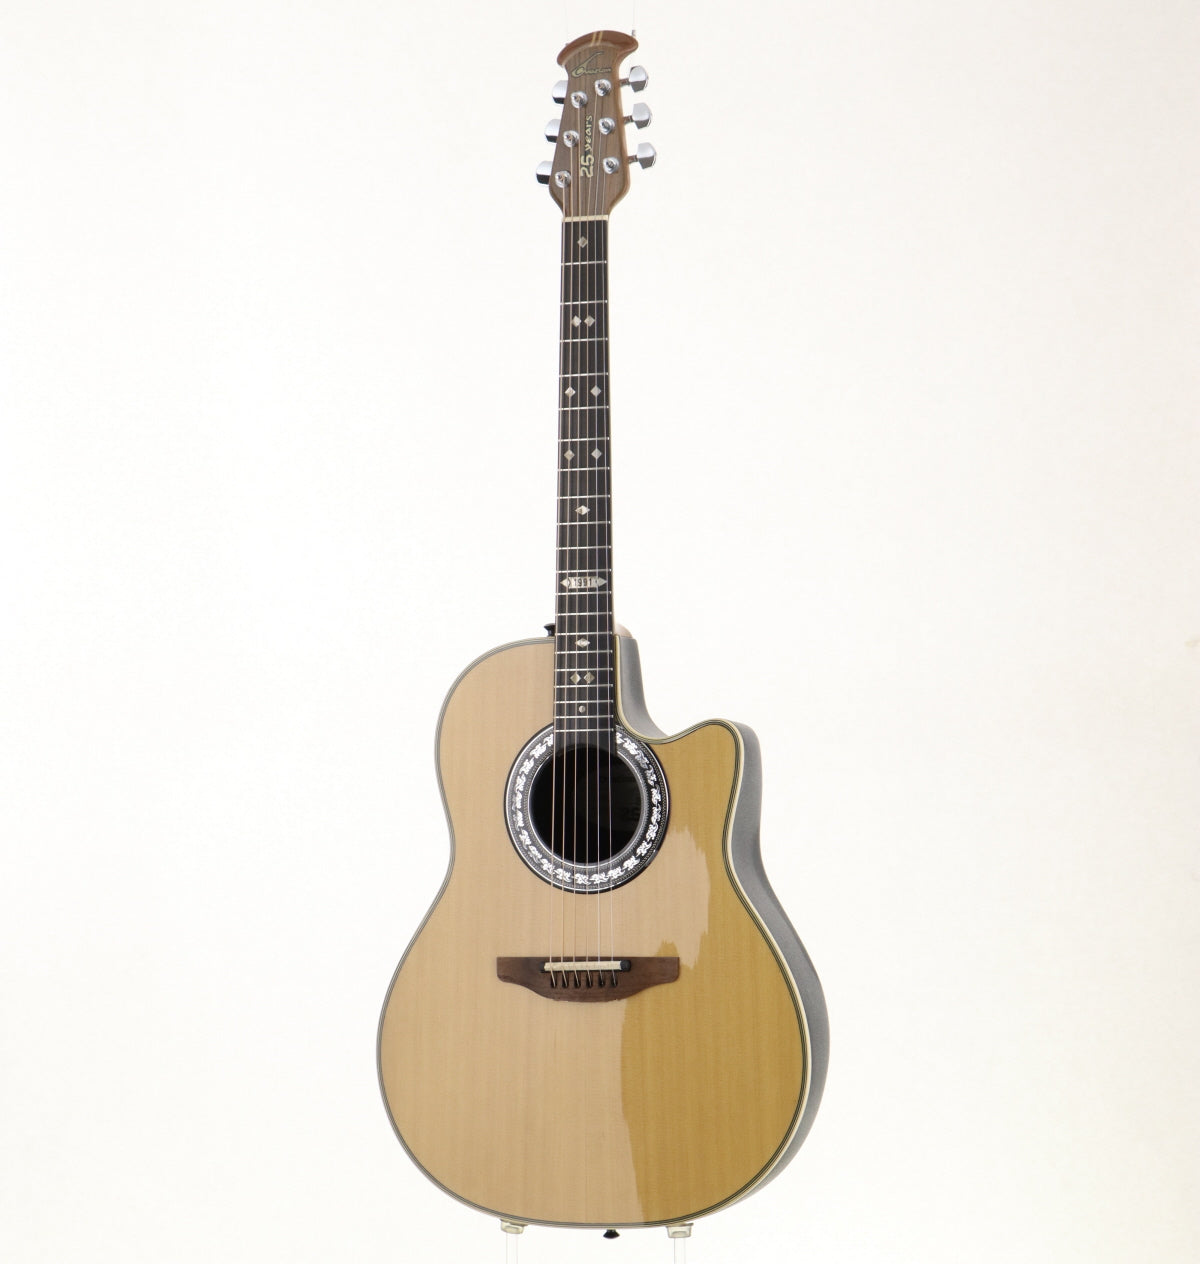 [SN 703] USED Ovation / 1991 Collectors Series [09]